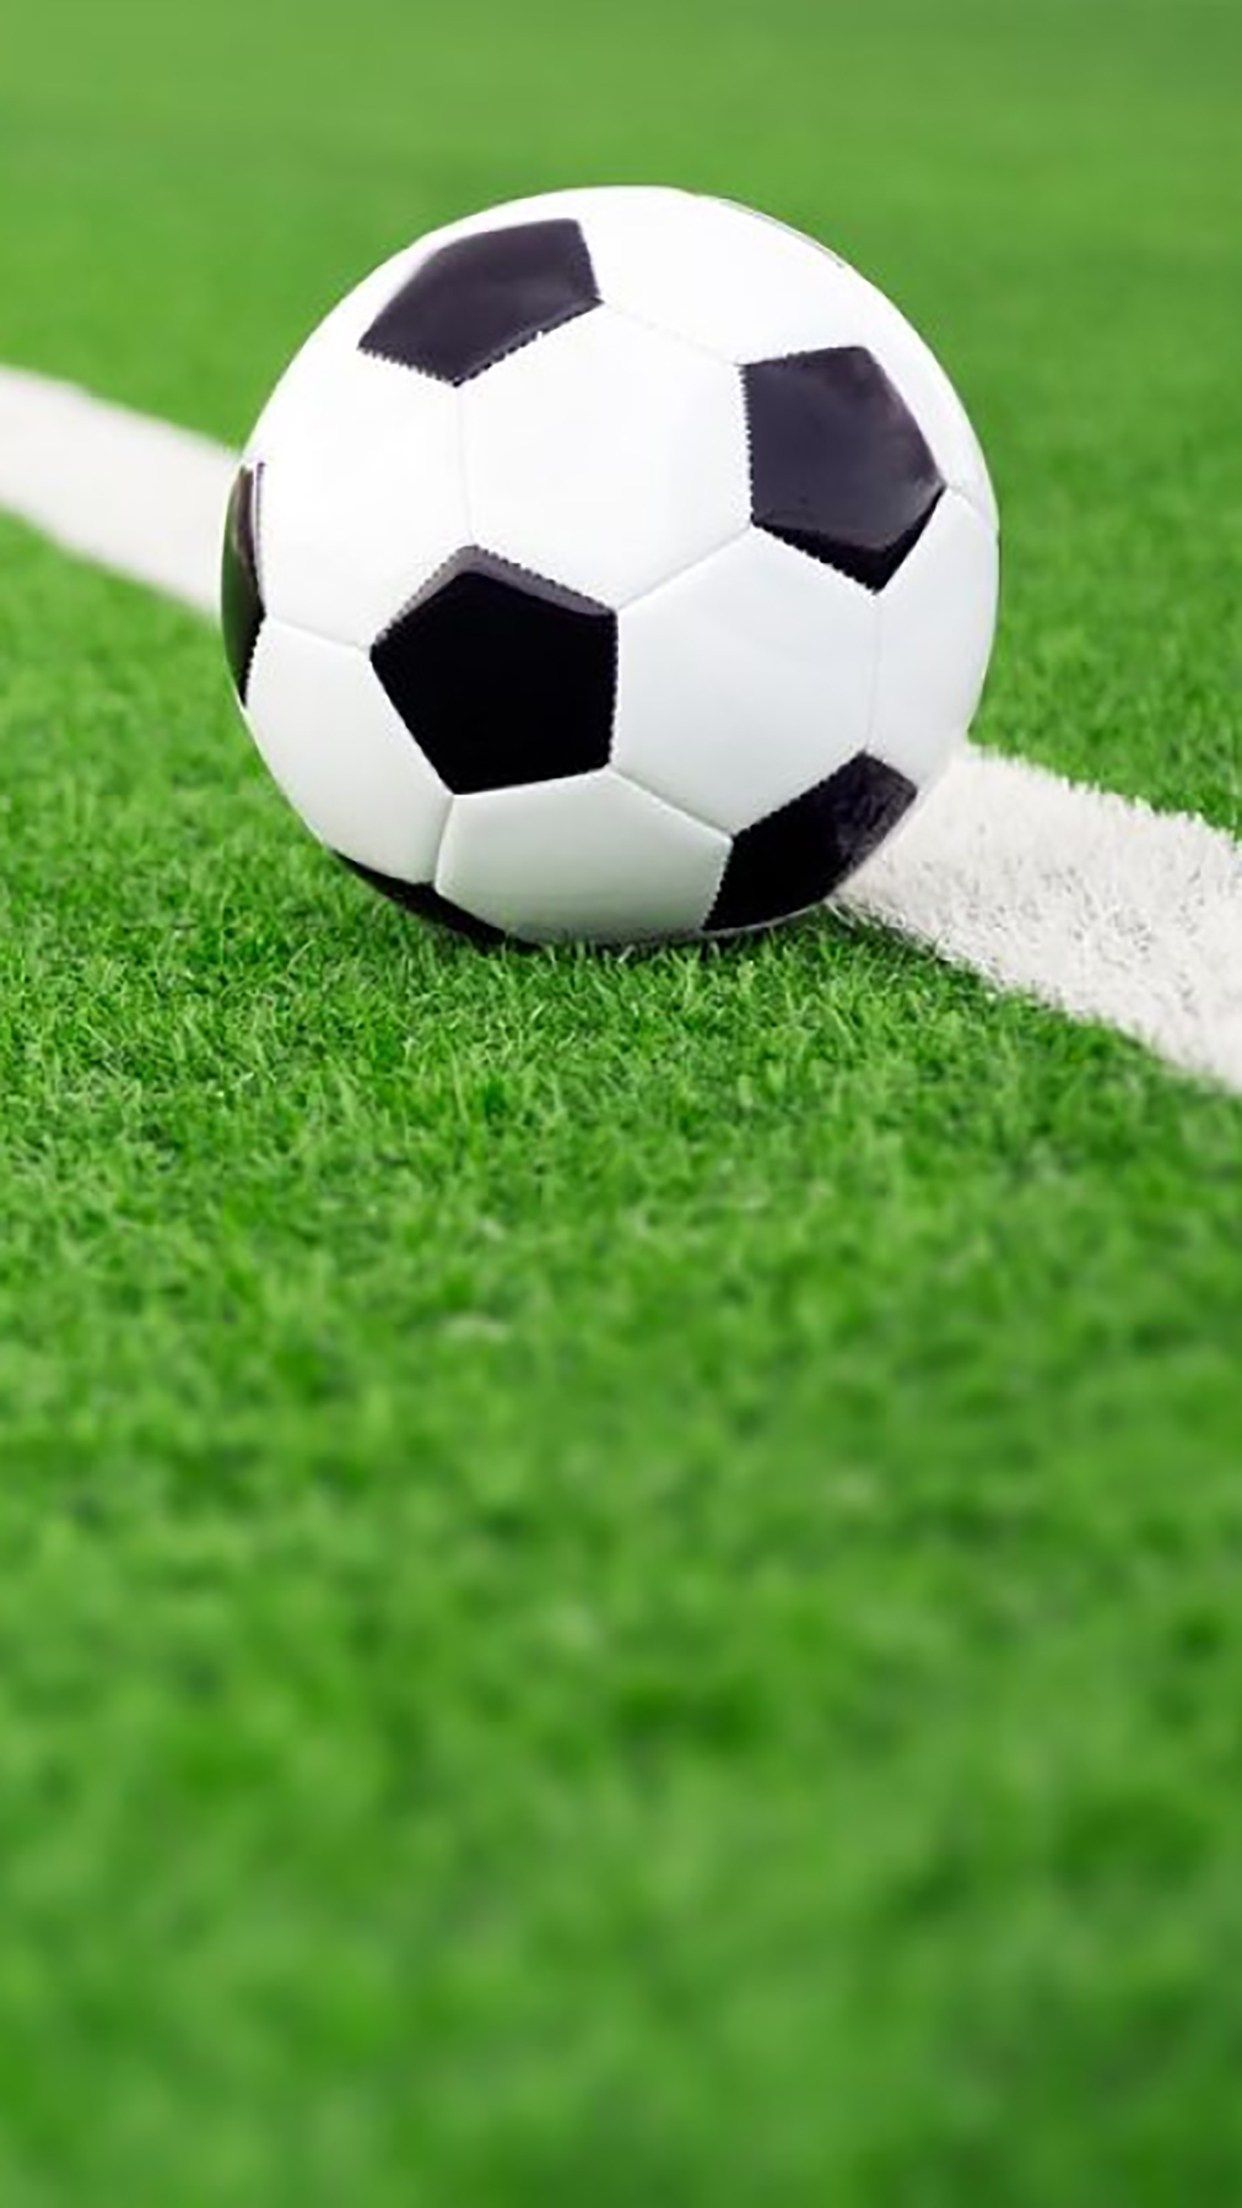 Soccer Ball, 2 Wallpaper for iPhone Pro Max, X, 6